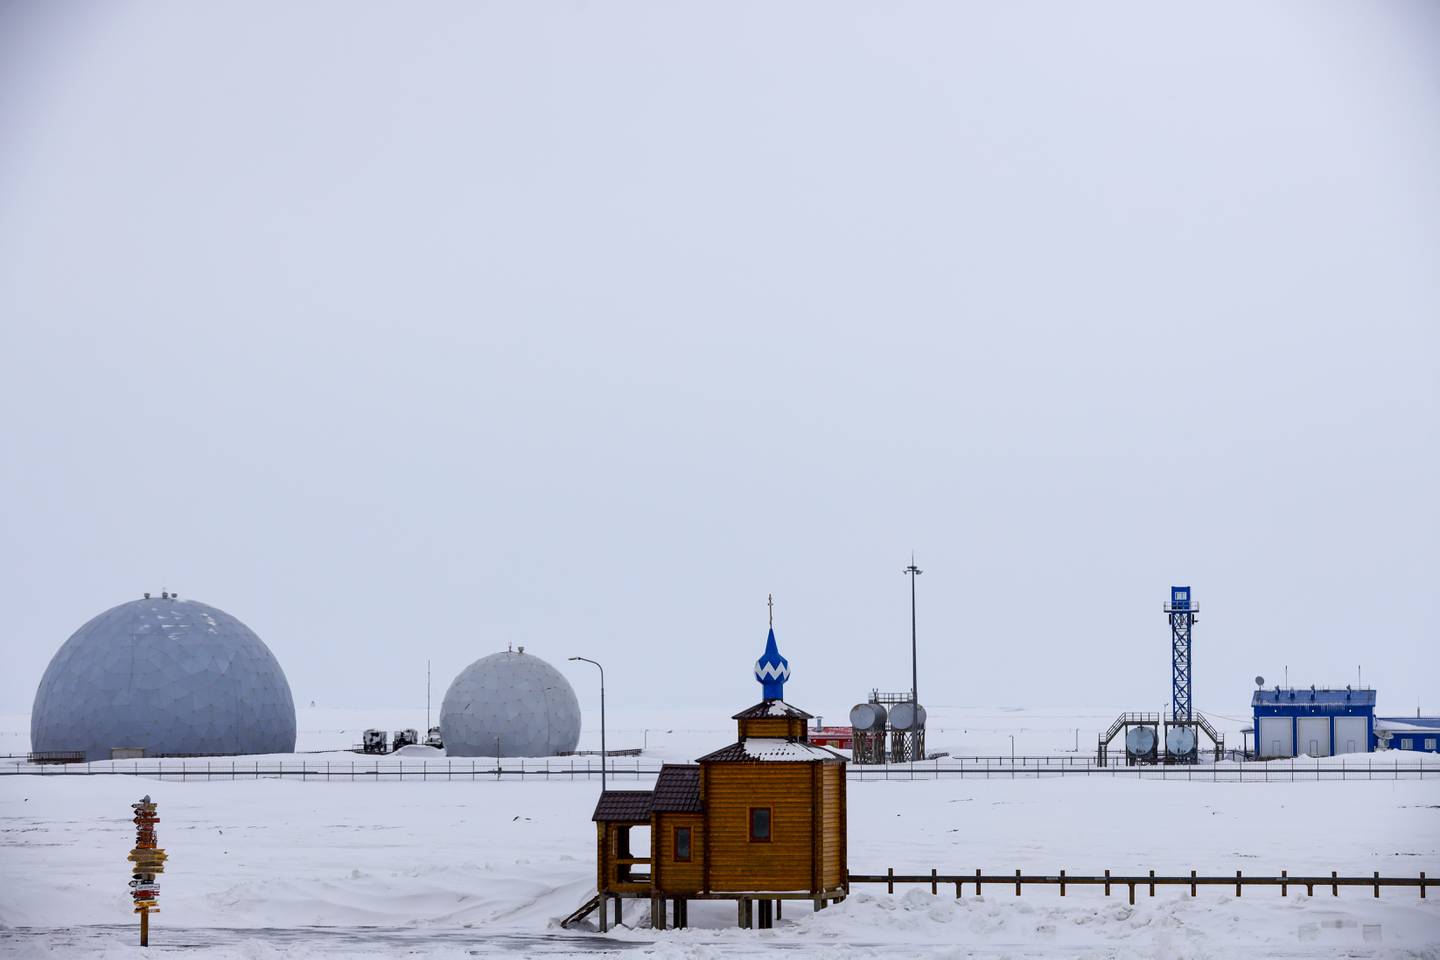 An Orthodox Church is seen with a radar facility in the background on the Alexandra Land island near Nagurskoye, Russia, Monday, May 17, 2021. Bristling with missiles and radar, Russia's northernmost military base projects the country's power and influence across the Arctic from a remote, desolate island amid an intensifying international competition for the region's vast resources. Russia's northernmost military outpost sits on the 80th parallel North, projecting power over wide swathes of Arctic amid an intensifying international rivalry over the polar region's vast resources. (AP Photo/Alexander Zemlianichenko)